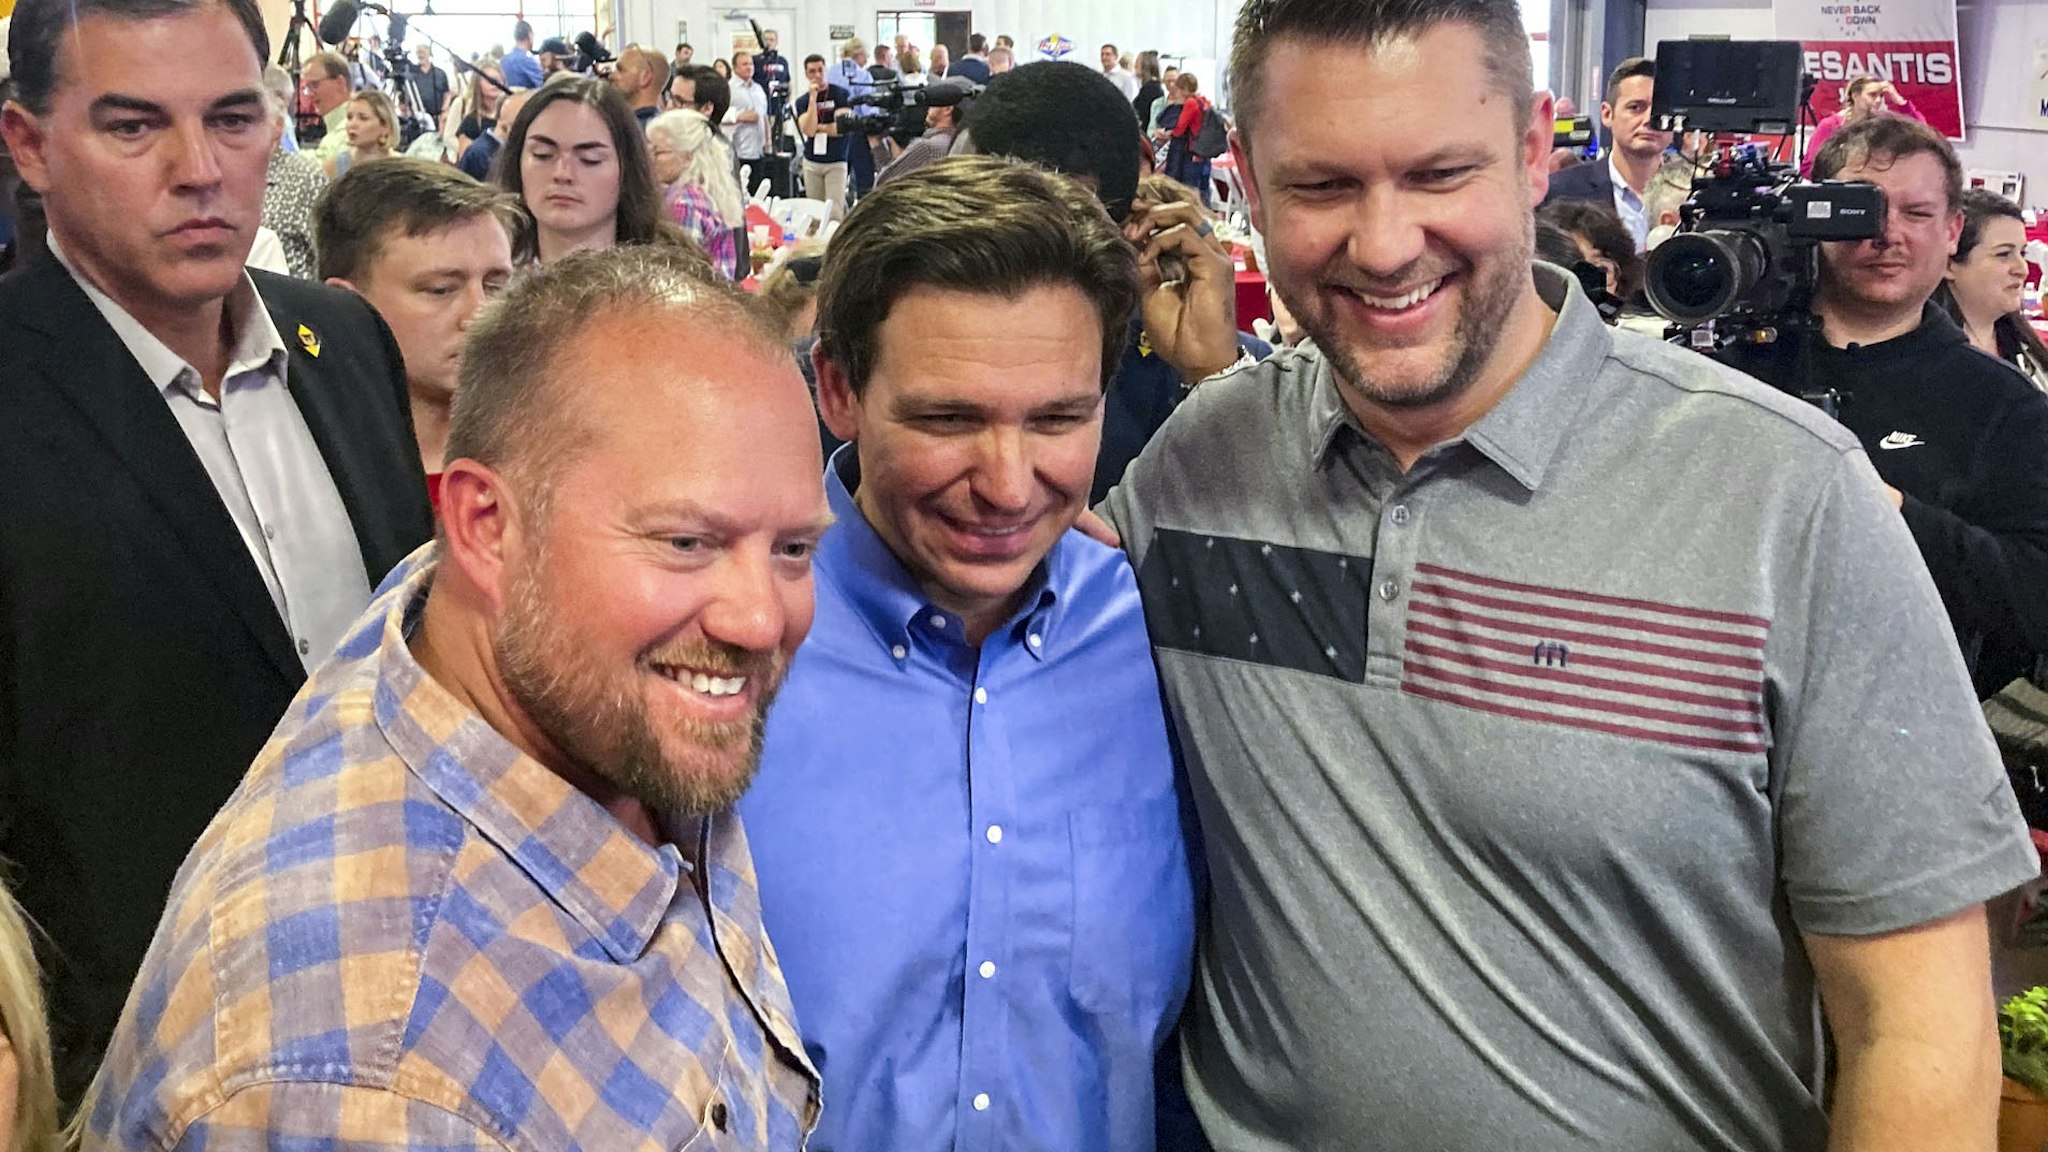 Florida Governor Ron DeSantis (center) poses for photographs after speaking during the Feenstra Family Picnic event in Sioux Center, Iowa on May 13th, 2023.